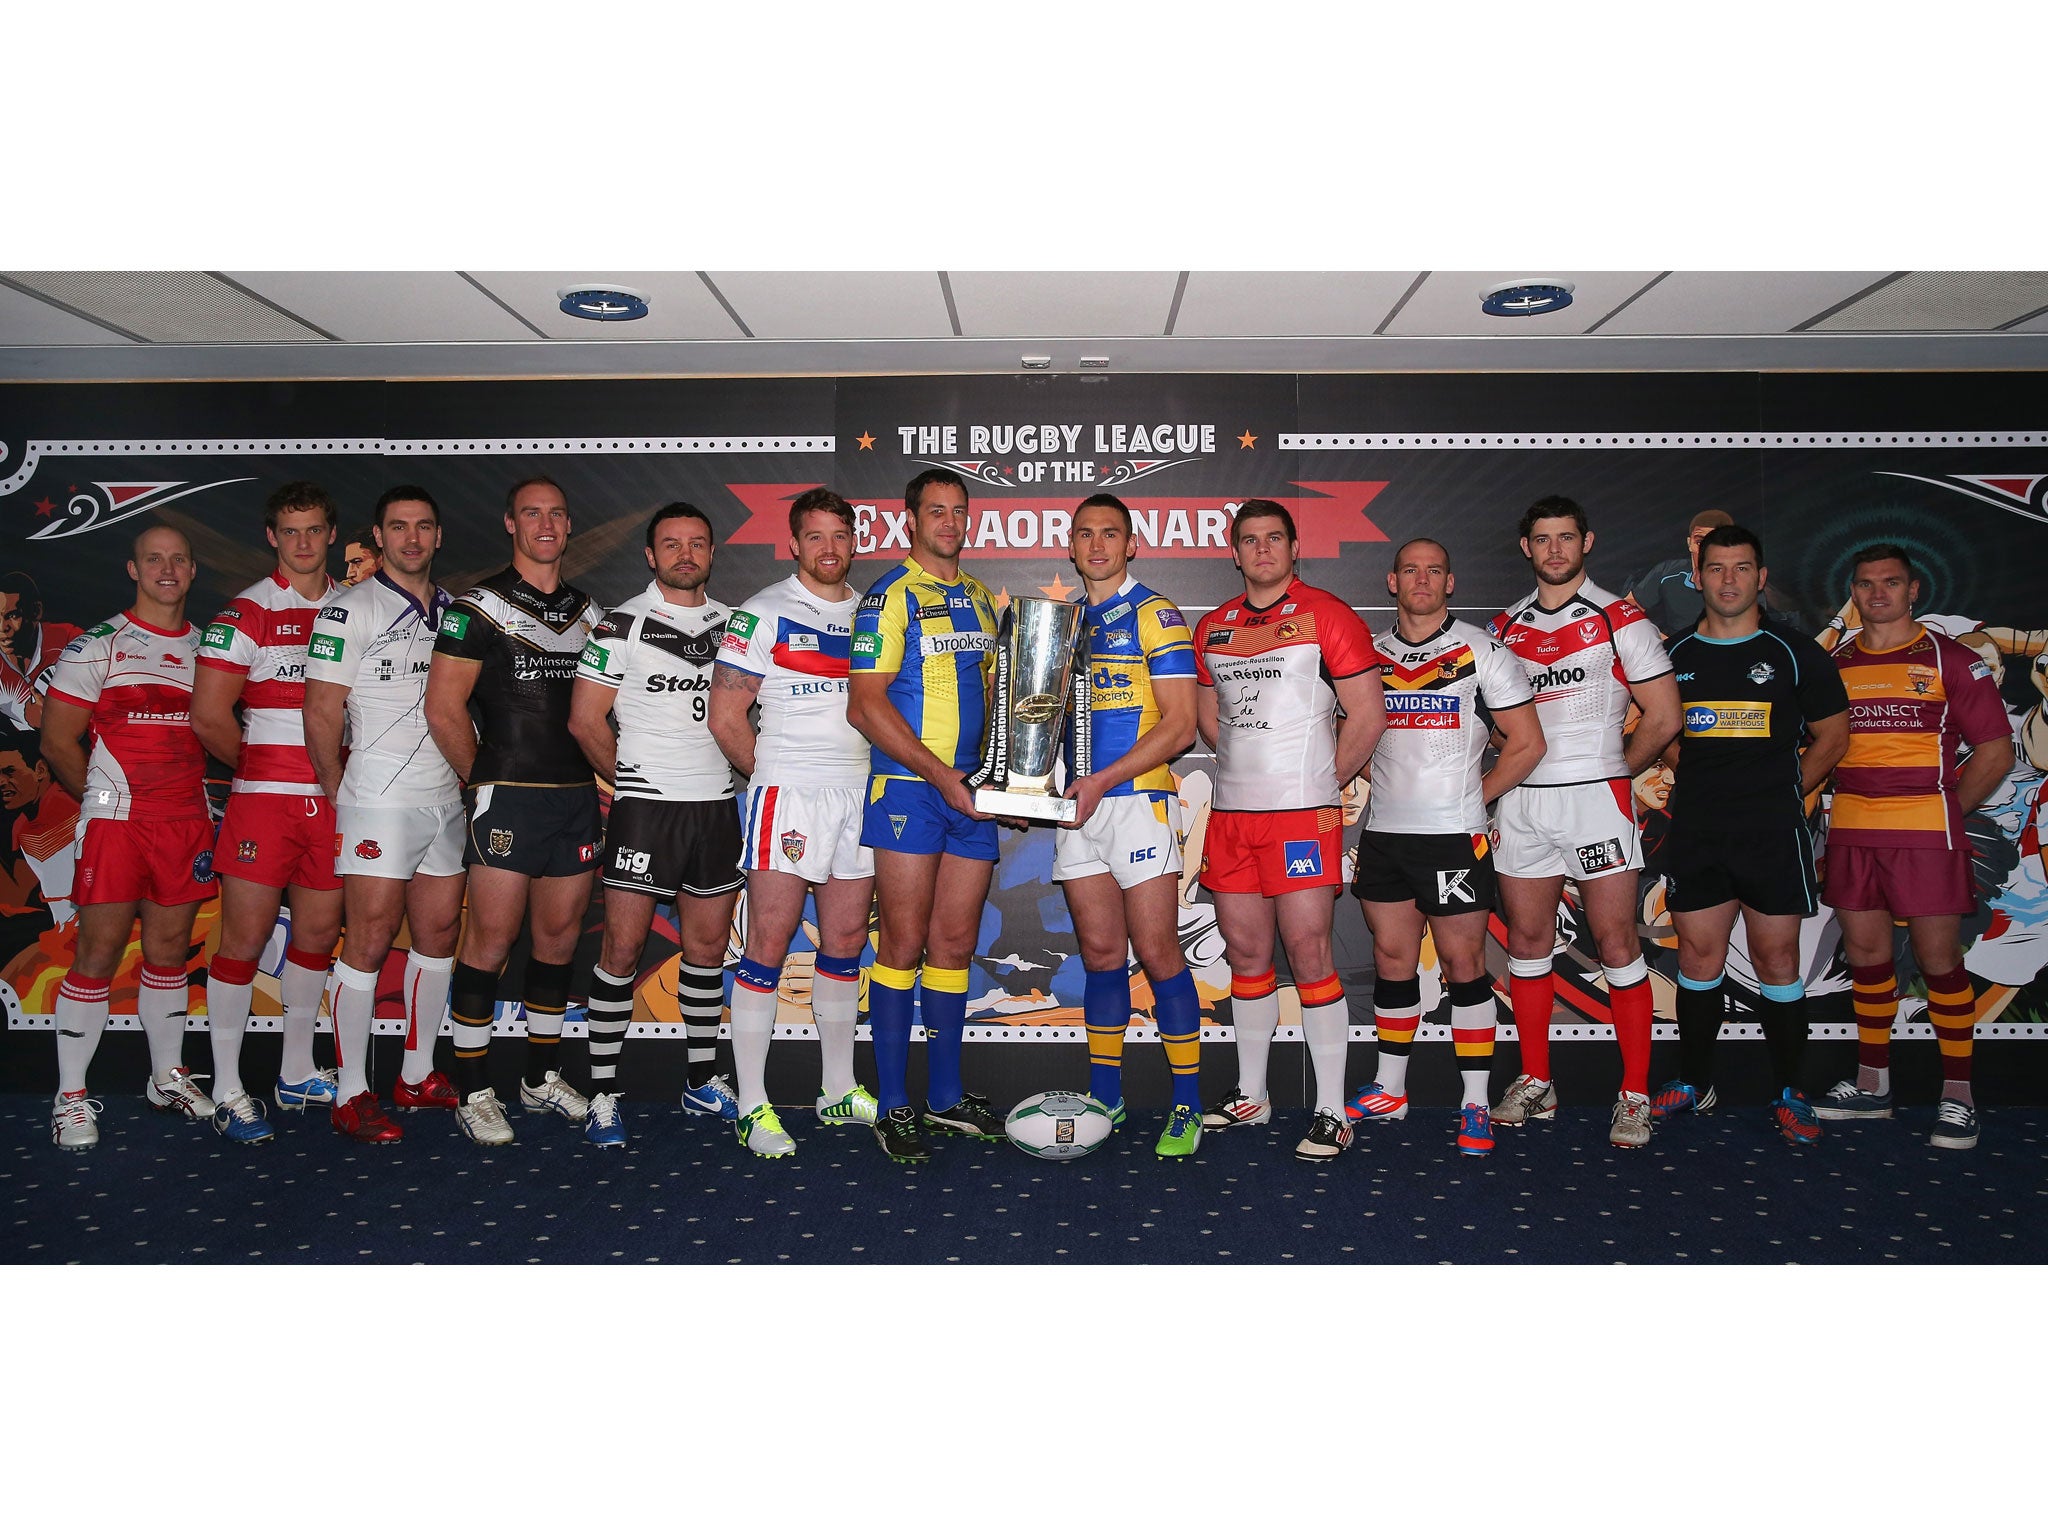 Players from each Super League club line up to promote the new season